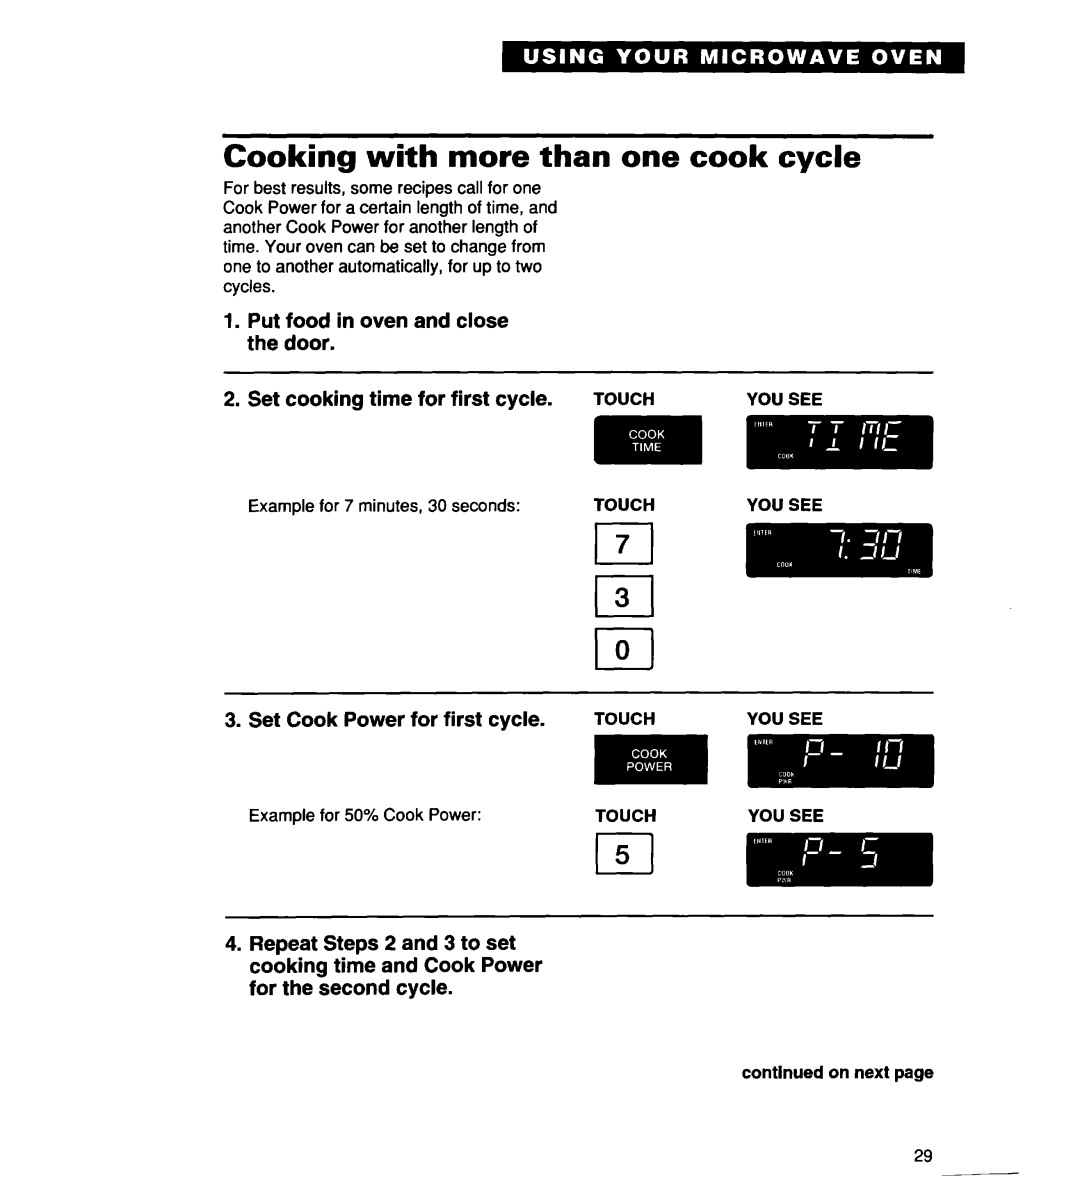 Whirlpool MH7135XE warranty Cooking with more than one cook cycle, Set Cook Power for first cycle 